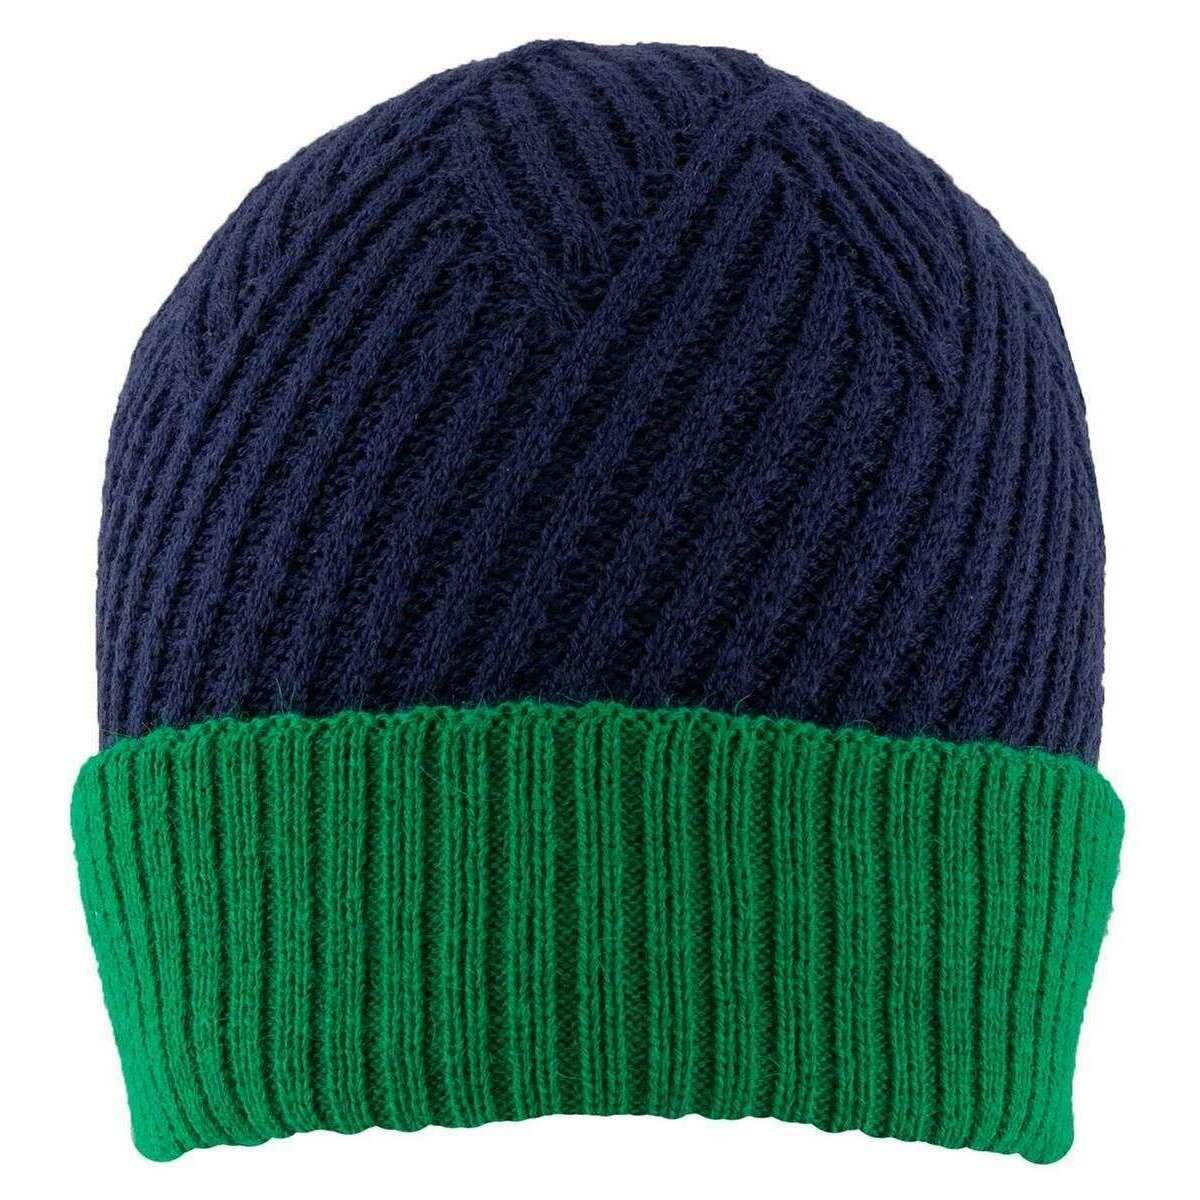 Dents Patchwork Cable Knit Beanie Hat - Navy/Emerald